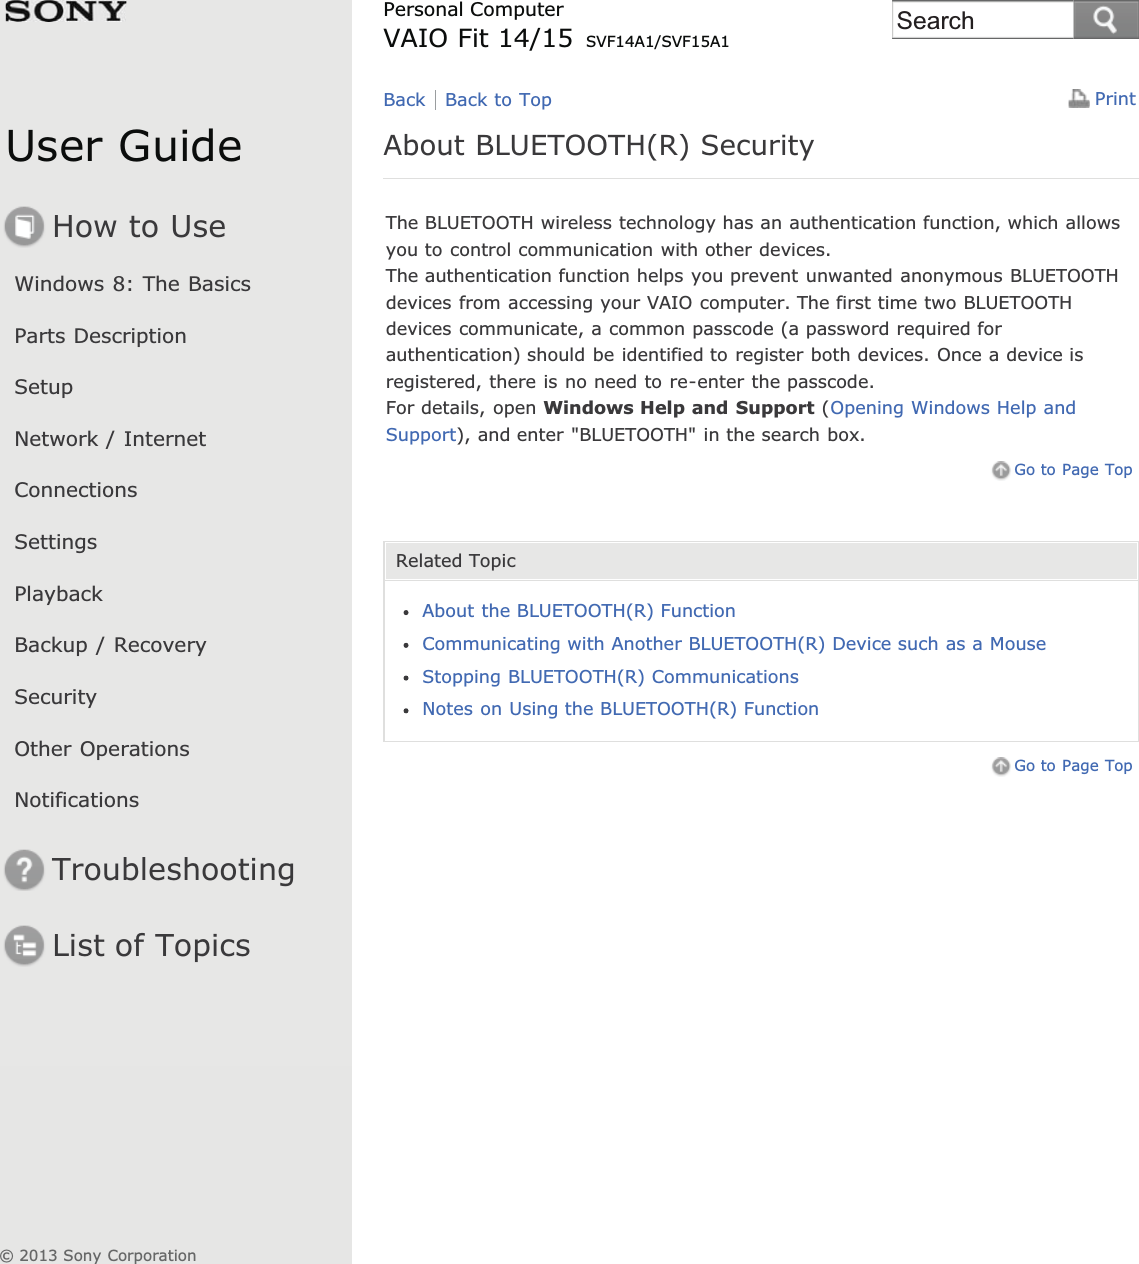 User GuideHow to UseWindows 8: The BasicsParts DescriptionSetupNetwork / InternetConnectionsSettingsPlaybackBackup / RecoverySecurityOther OperationsNotificationsTroubleshootingList of TopicsPrintPersonal ComputerVAIO Fit 14/15 SVF14A1/SVF15A1About BLUETOOTH(R) SecurityThe BLUETOOTH wireless technology has an authentication function, which allowsyou to control communication with other devices.The authentication function helps you prevent unwanted anonymous BLUETOOTHdevices from accessing your VAIO computer. The first time two BLUETOOTHdevices communicate, a common passcode (a password required forauthentication) should be identified to register both devices. Once a device isregistered, there is no need to re-enter the passcode.For details, open Windows Help and Support (Opening Windows Help andSupport), and enter &quot;BLUETOOTH&quot; in the search box.Go to Page TopRelated TopicAbout the BLUETOOTH(R) FunctionCommunicating with Another BLUETOOTH(R) Device such as a MouseStopping BLUETOOTH(R) CommunicationsNotes on Using the BLUETOOTH(R) FunctionGo to Page TopBack Back to Top© 2013 Sony CorporationSearch